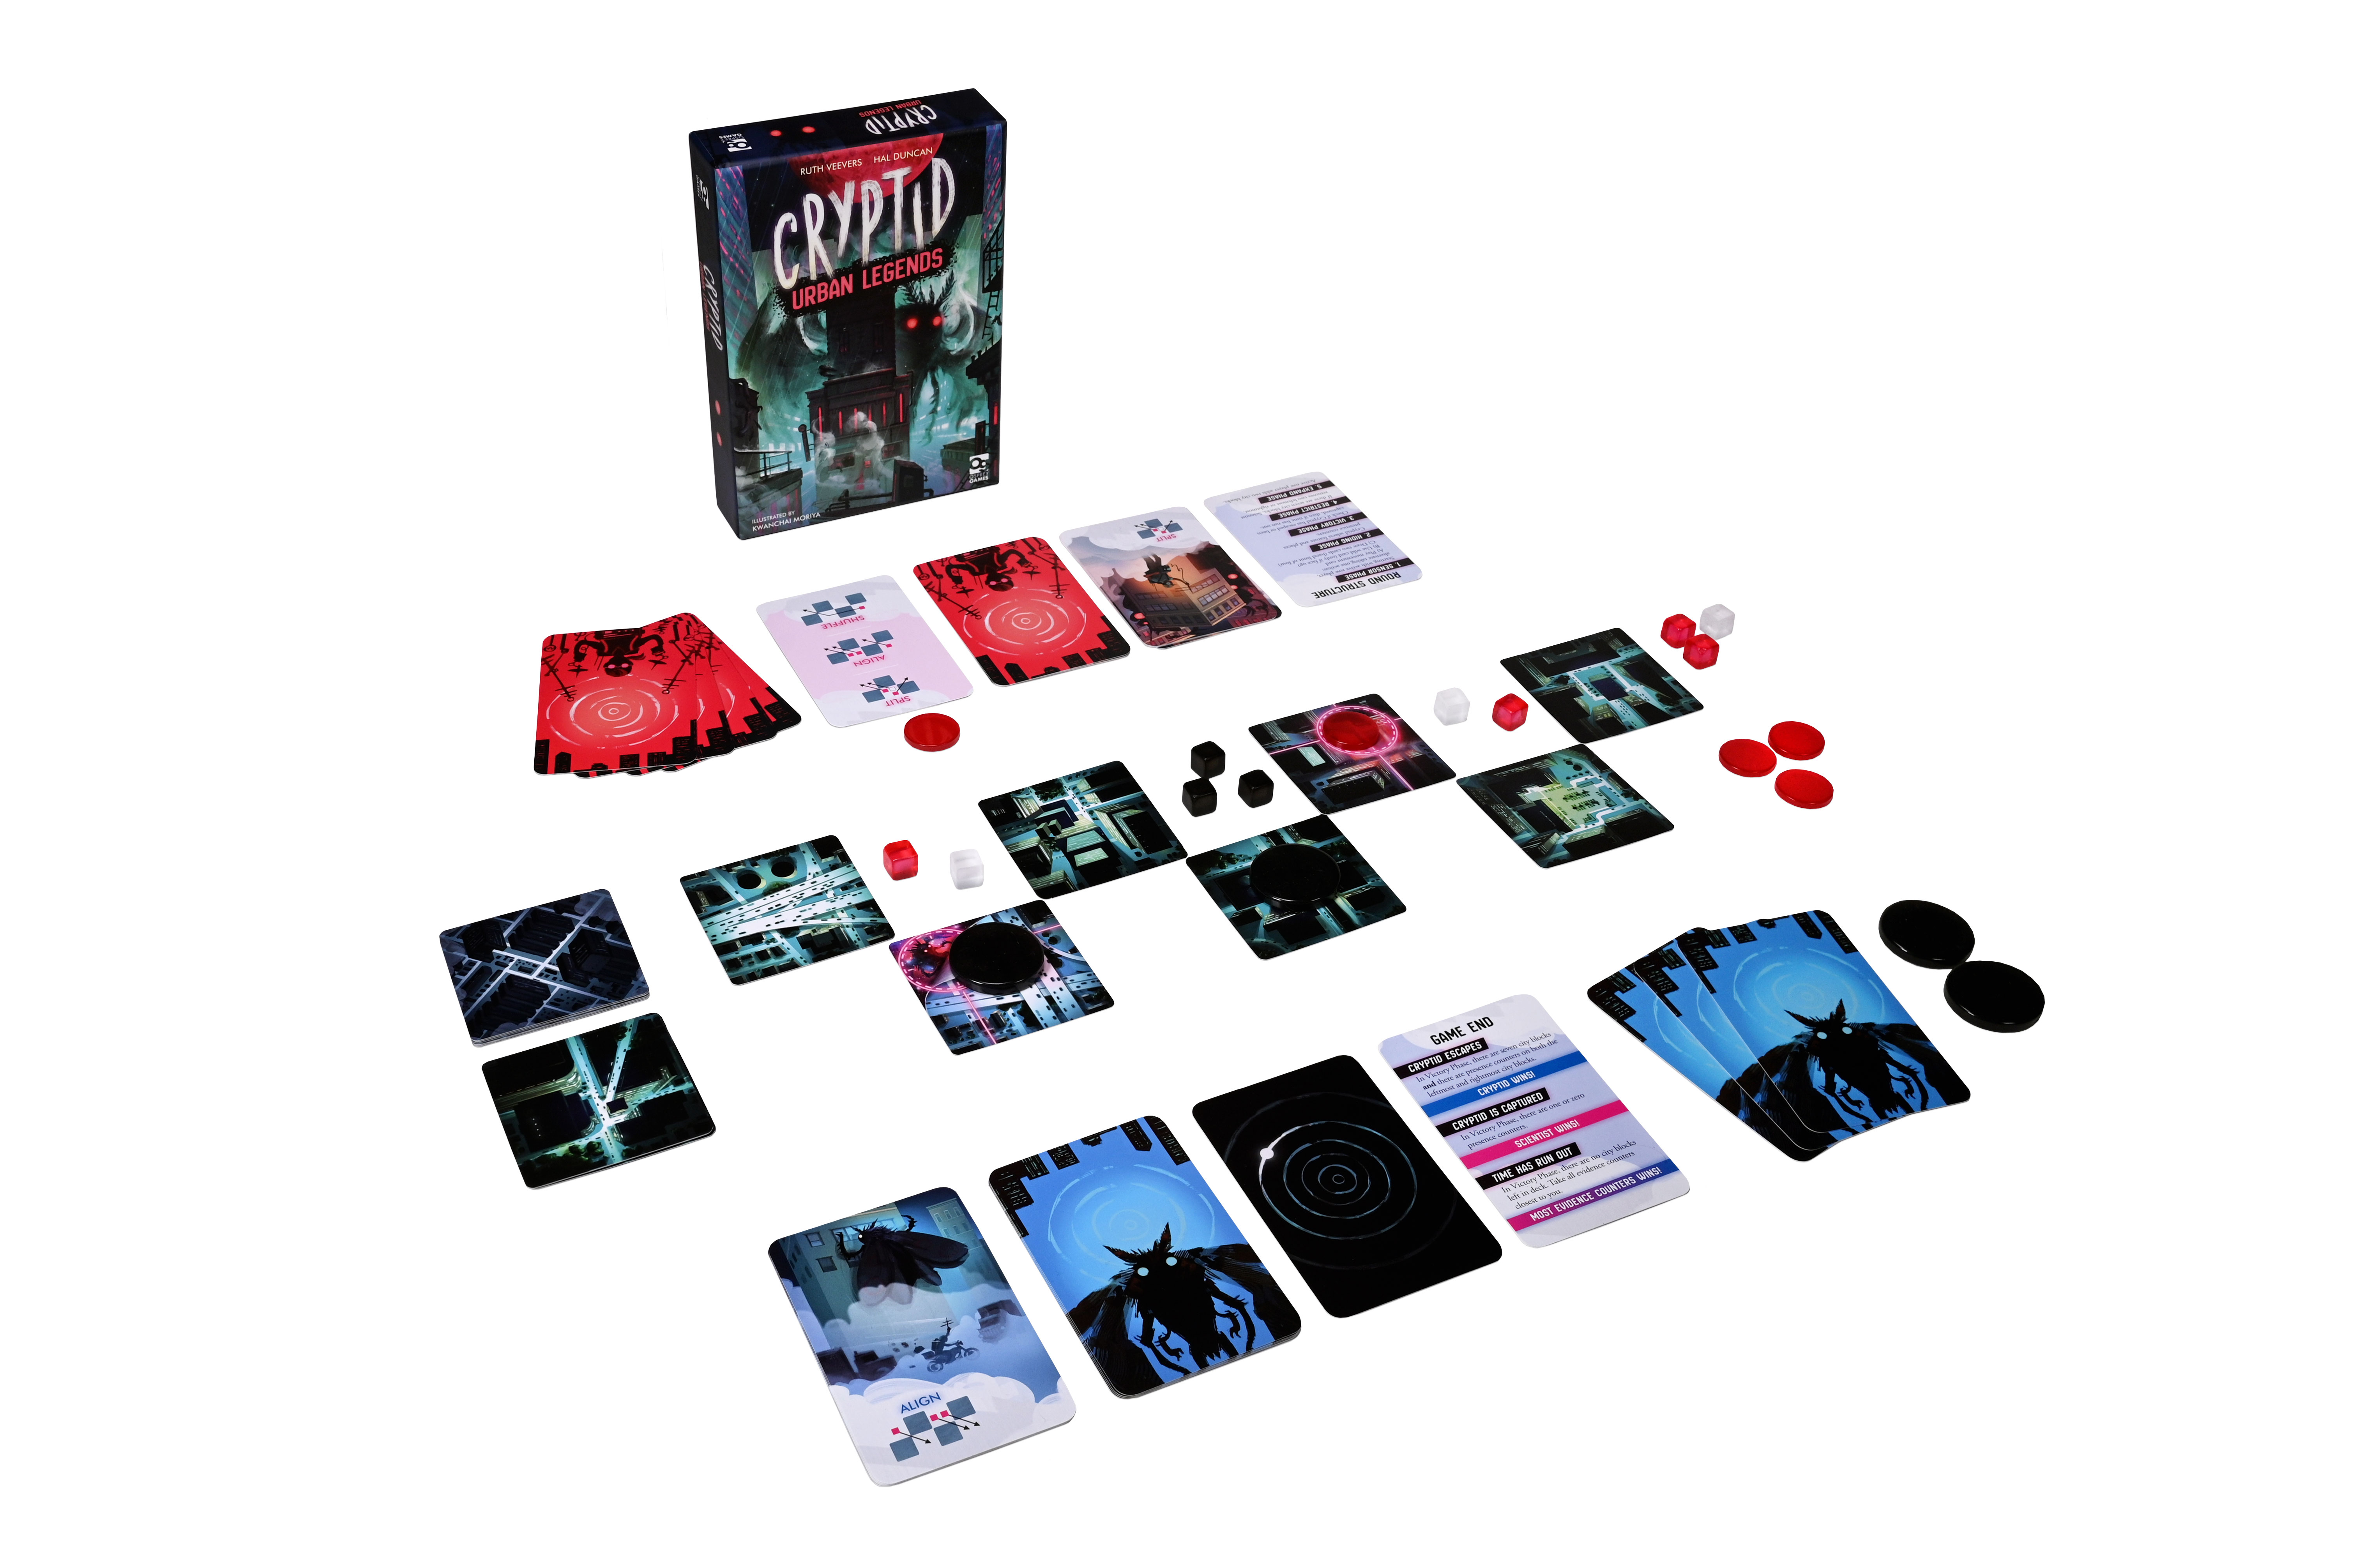 Cryptid Urban Legends Game layout